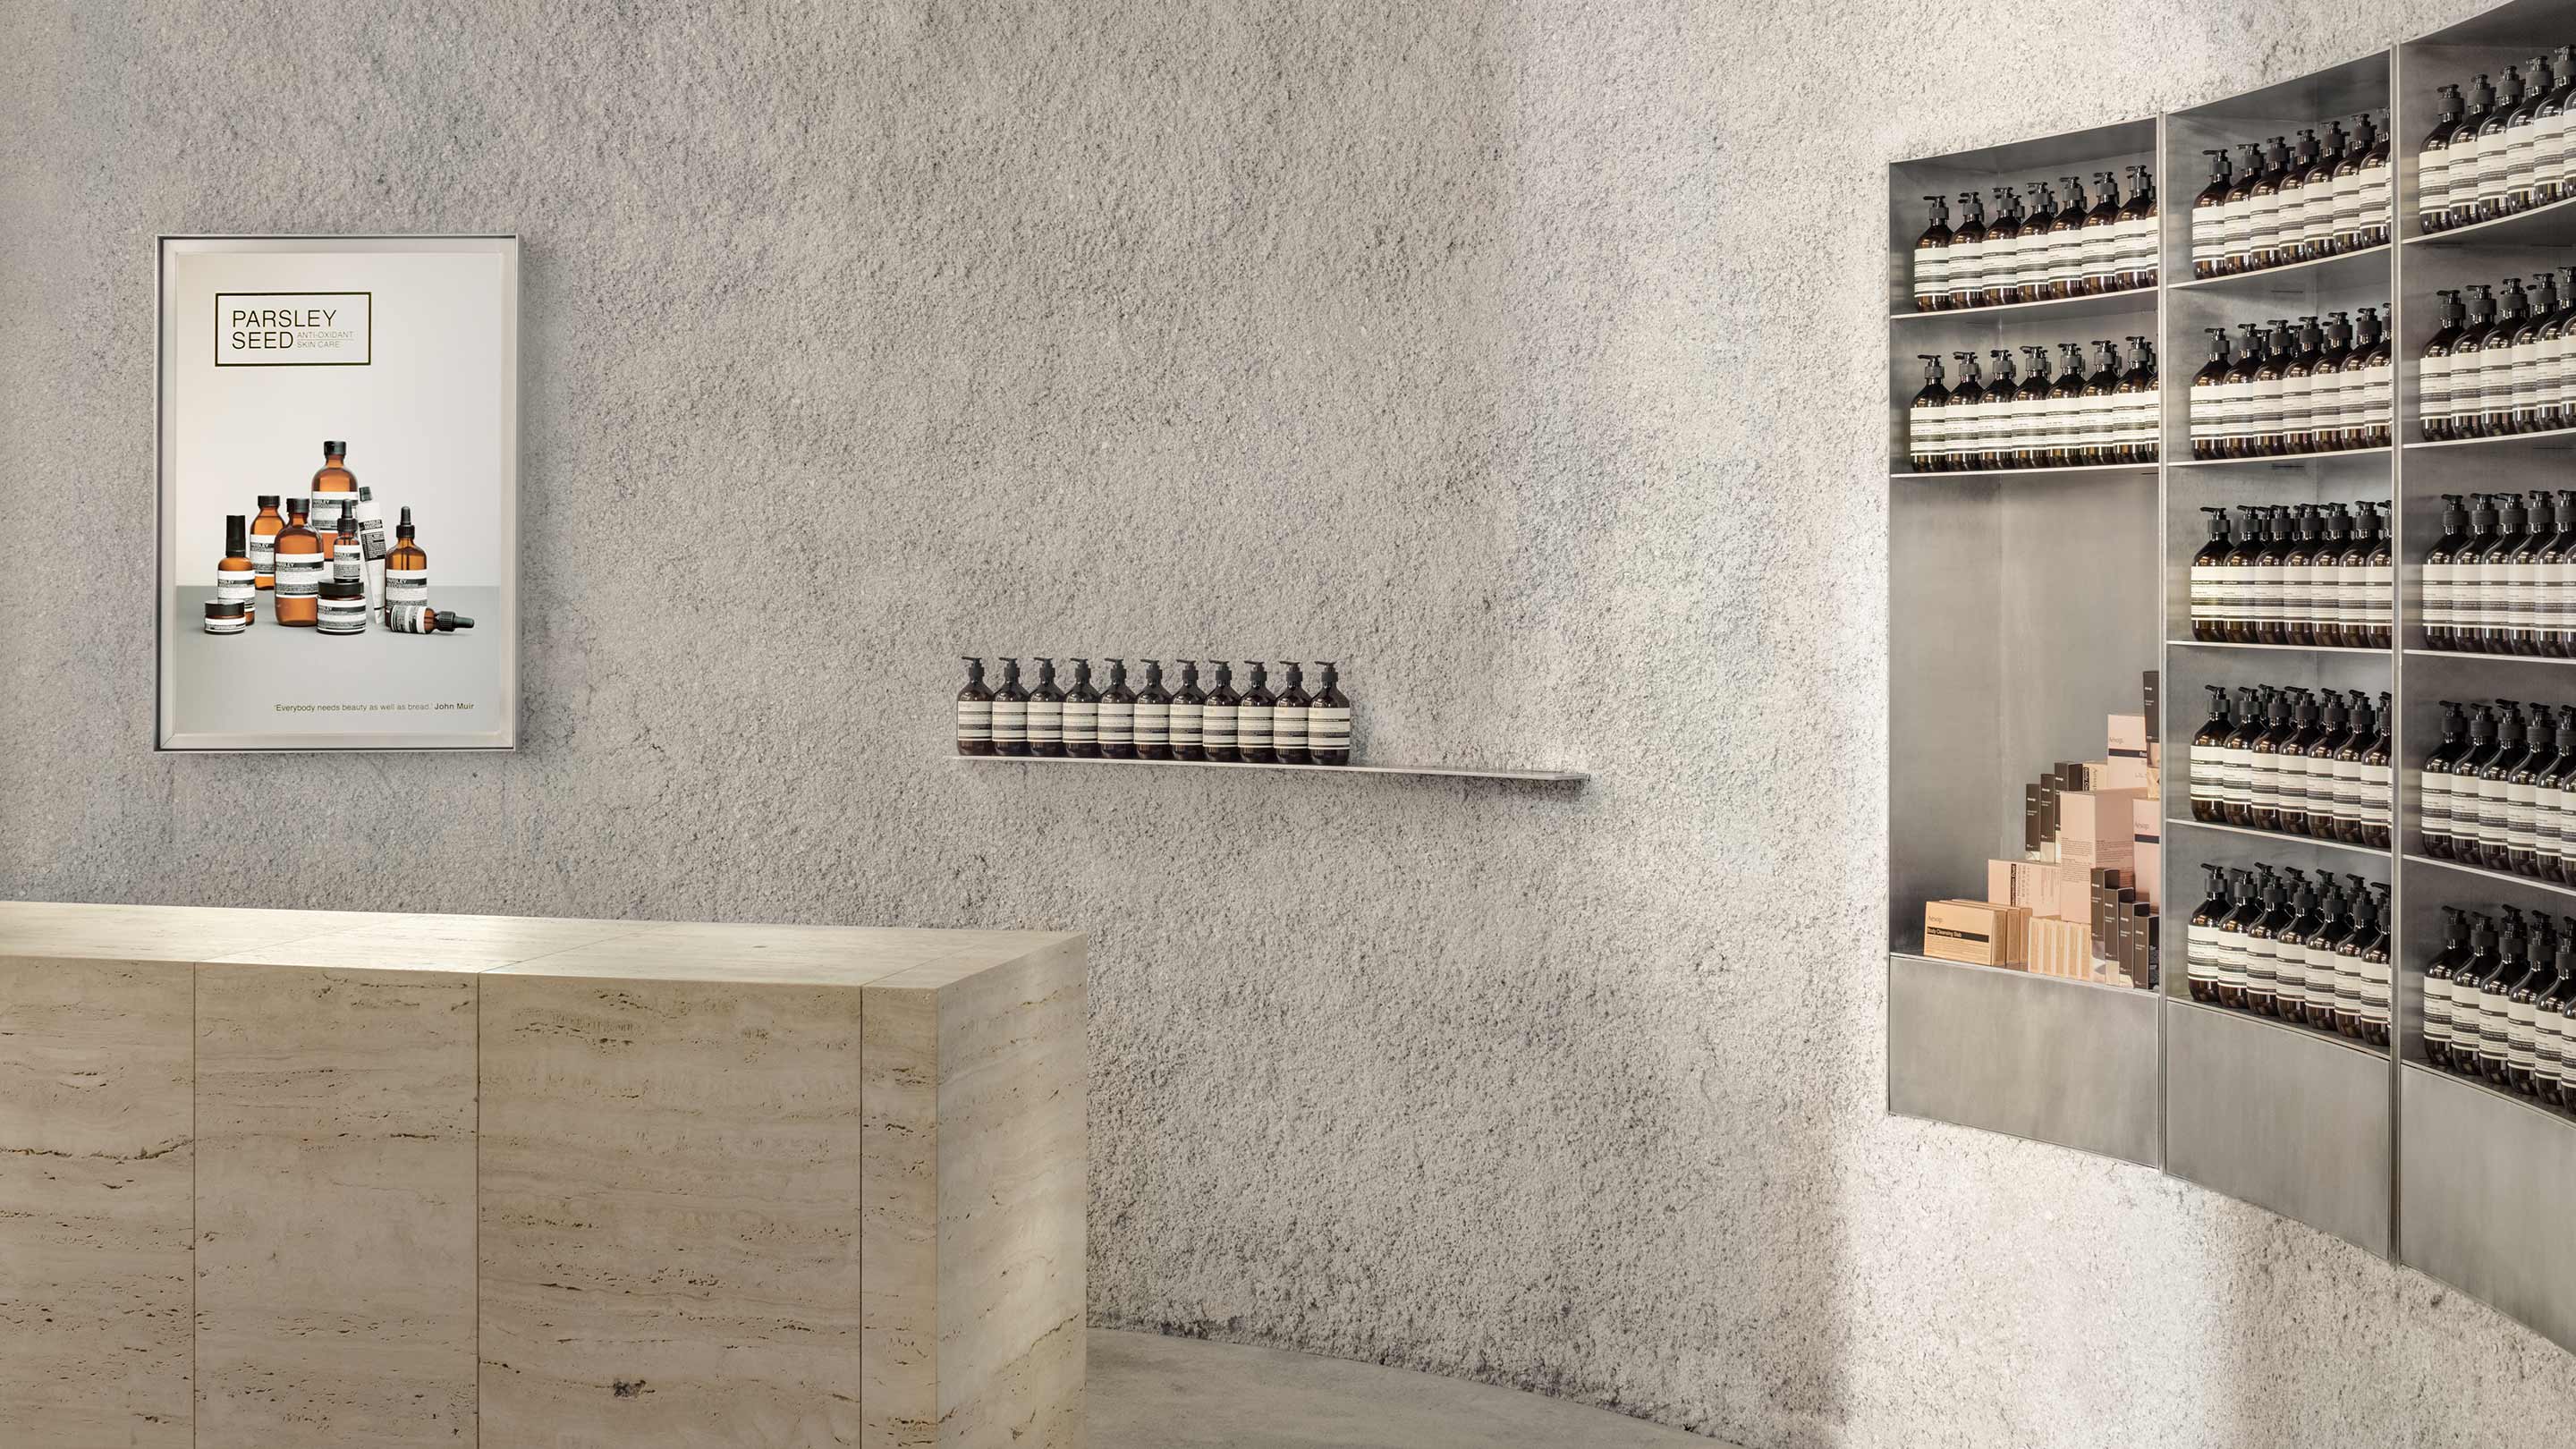 An off-white curved textured wall surrounds the front counter inside Aesop North Bridge